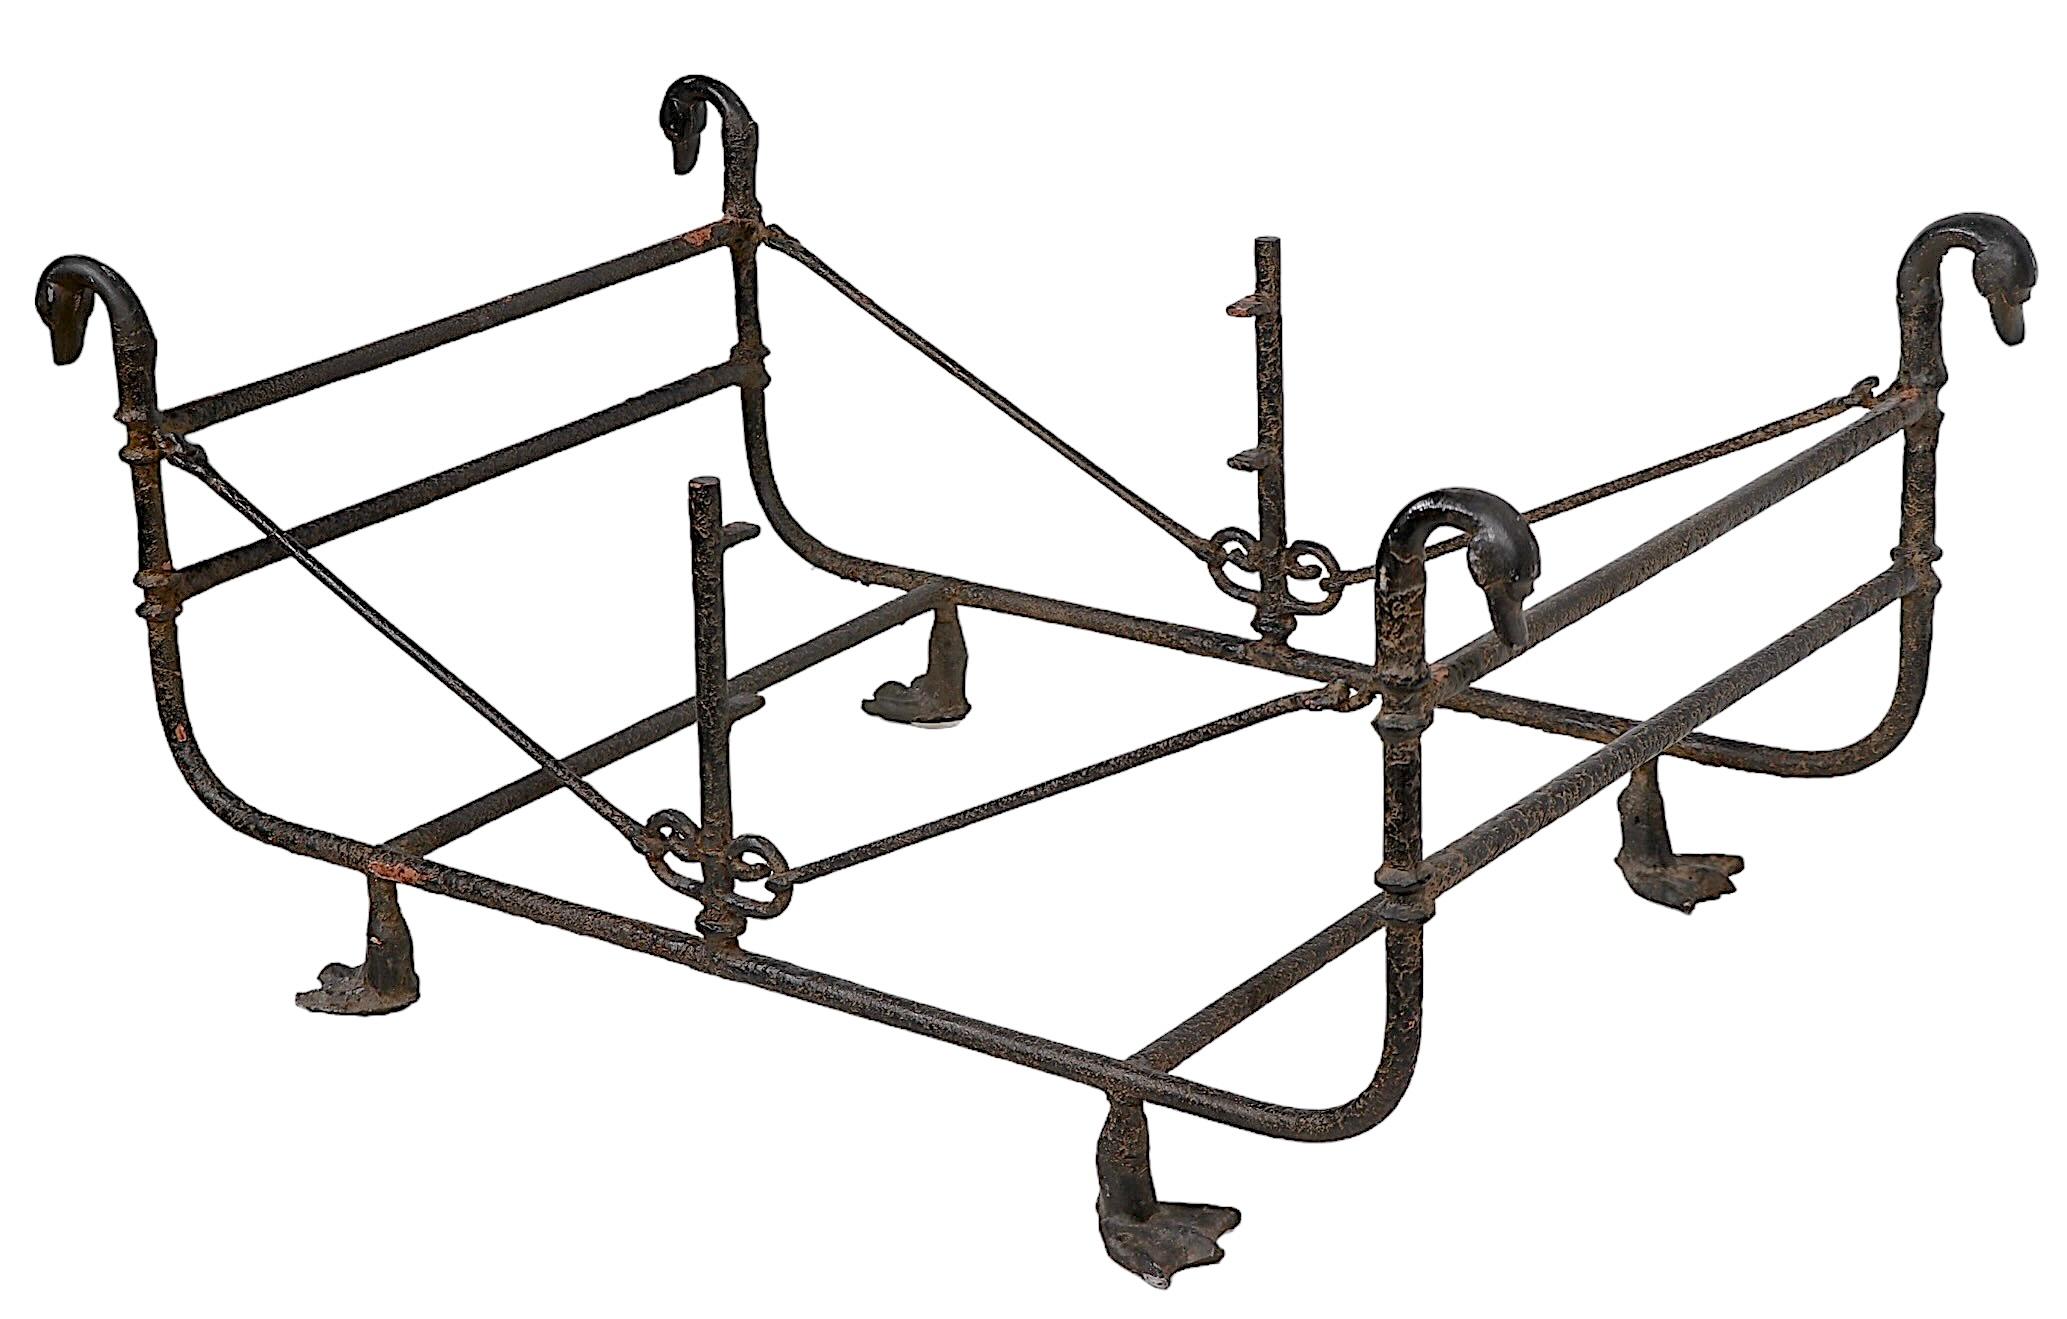 Wrought Iron and Glass Etruscan Coffee Table bib Paul Ferrante  after Giacometti For Sale 2